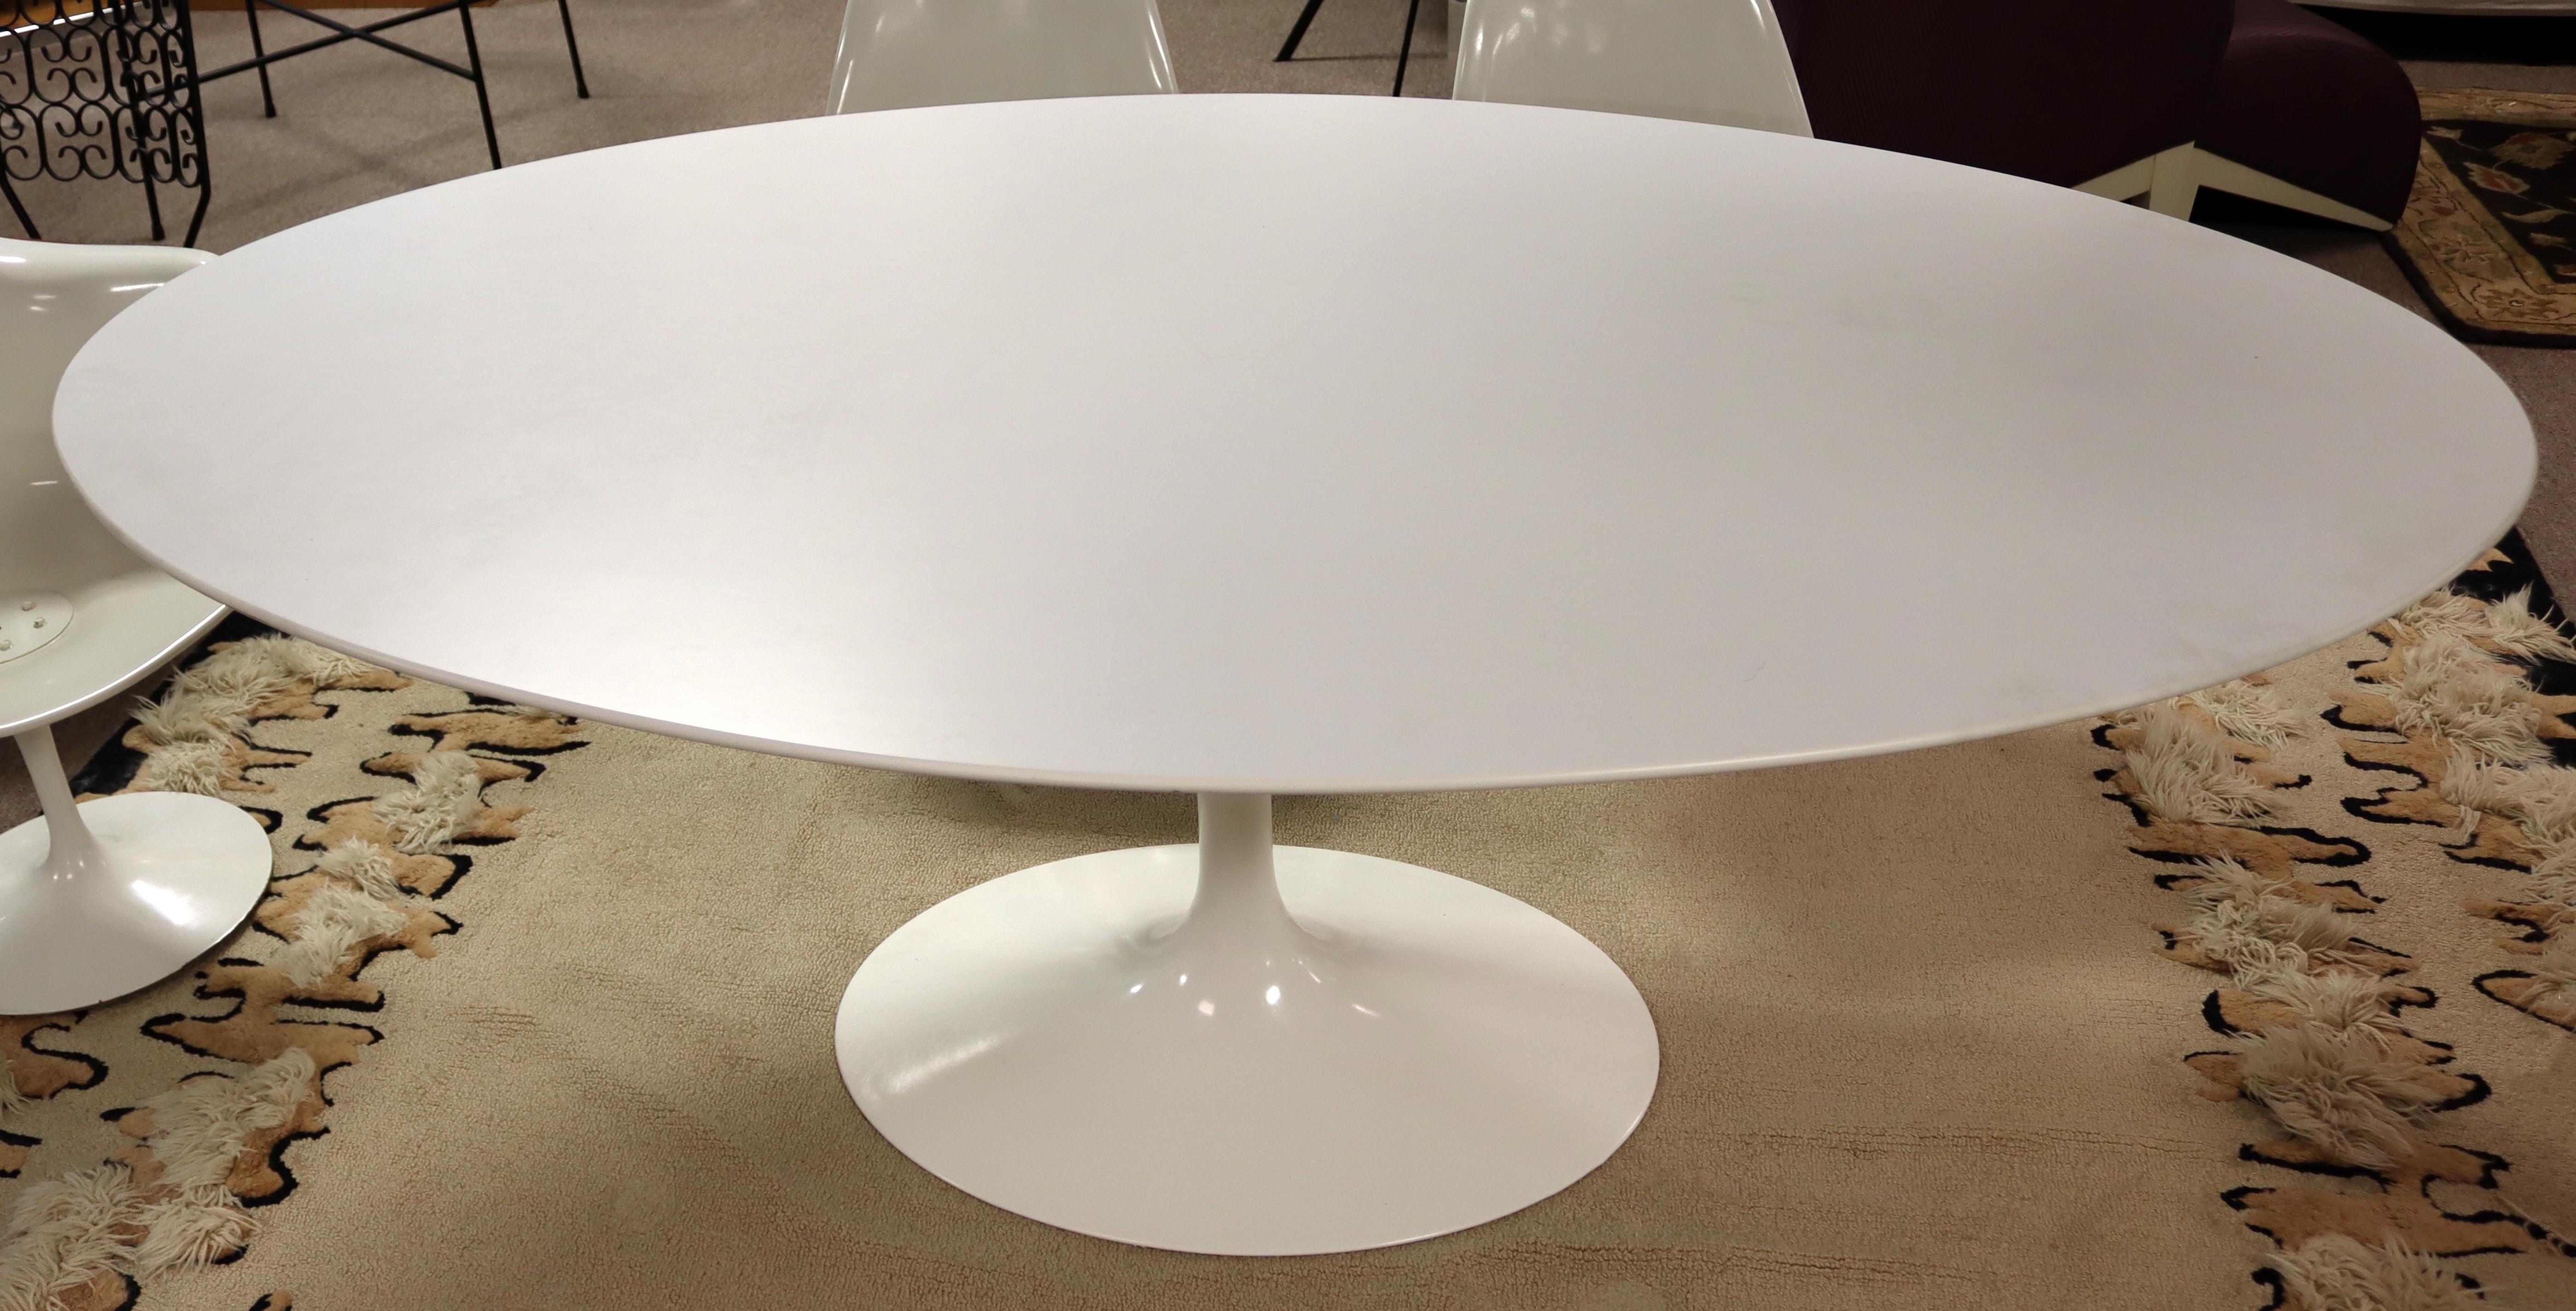 For your consideration is an original, signed, Tulip dining table, by Eero Saarinen for Knoll, circa 1957. In excellent vintage condition. The dimensions of the table are 78